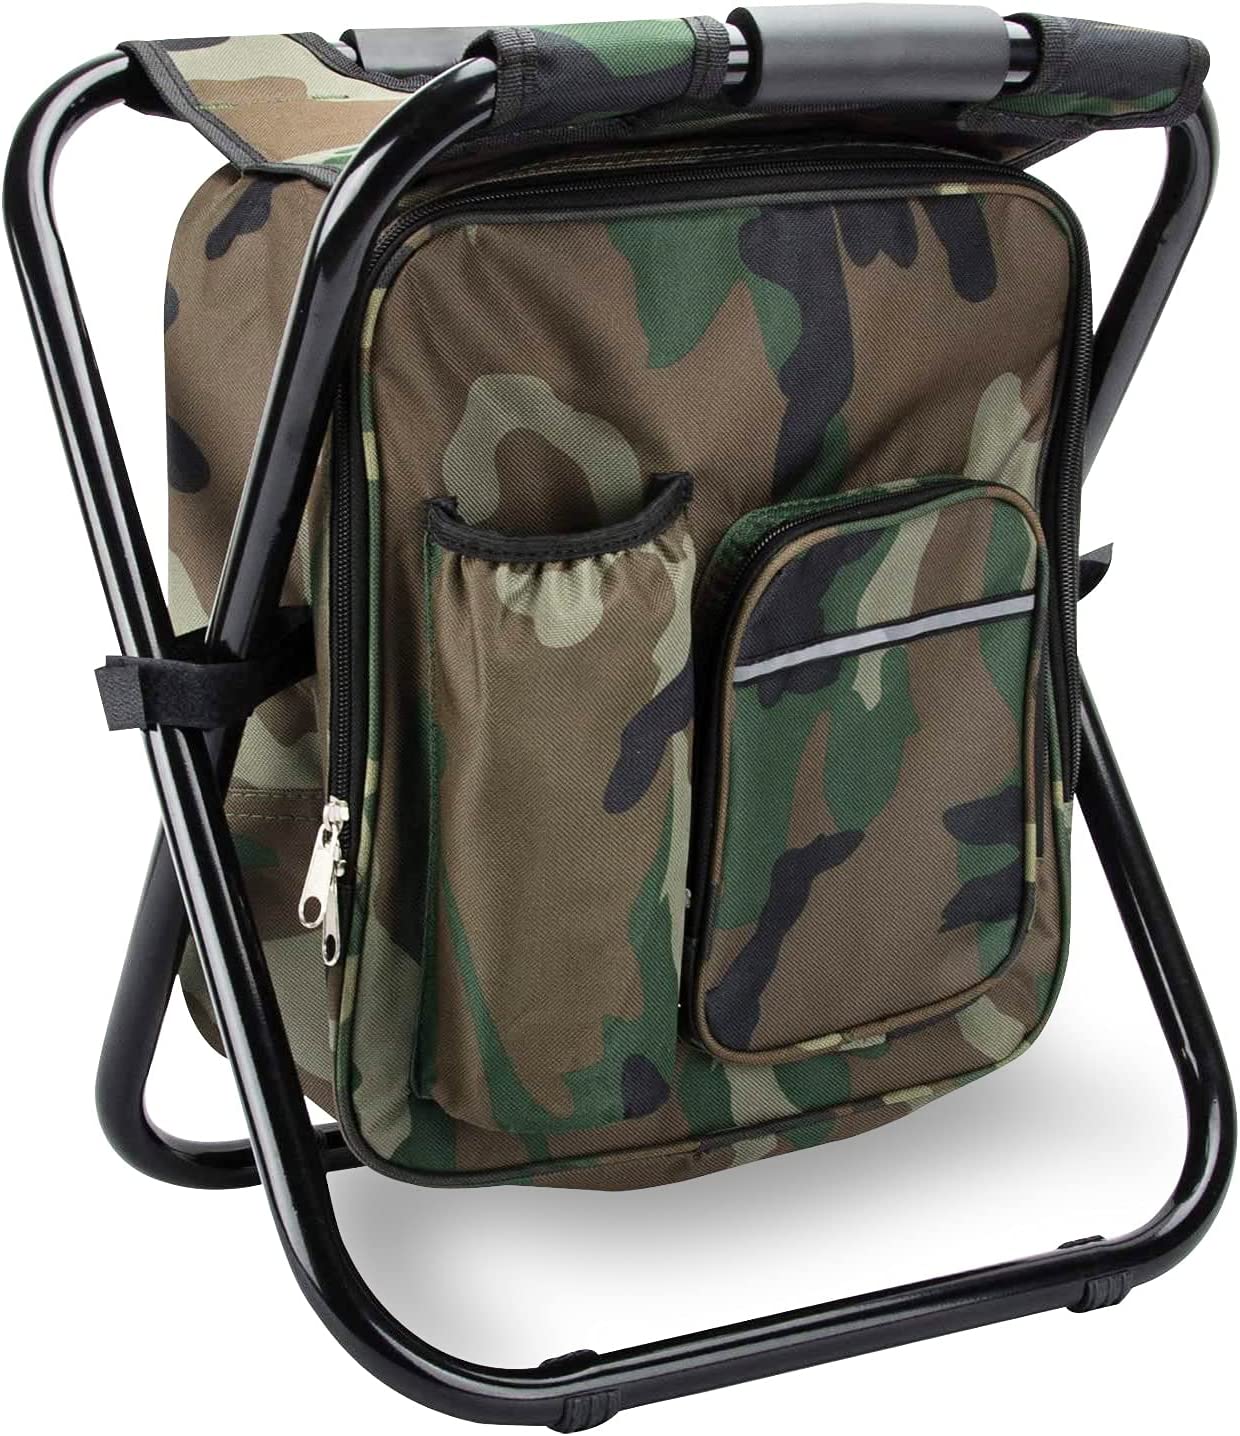 12 Must-Have Father's Day Hunting Gifts: Make His Adventure Memorable!